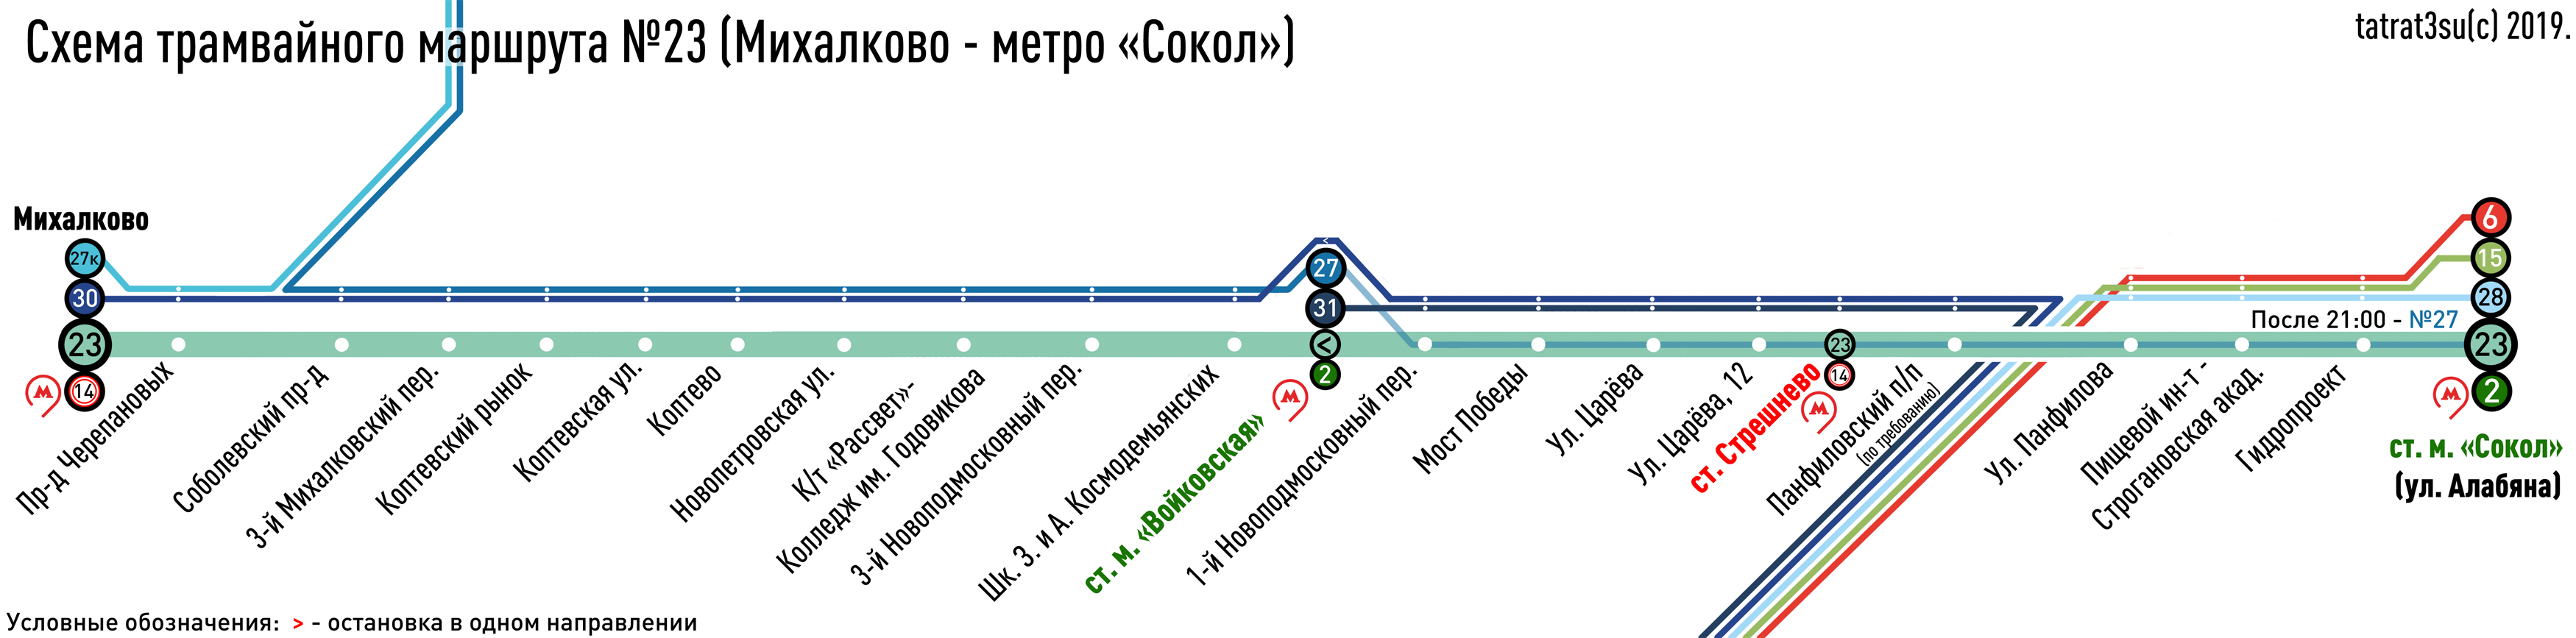 Moscova — Individual Route Maps